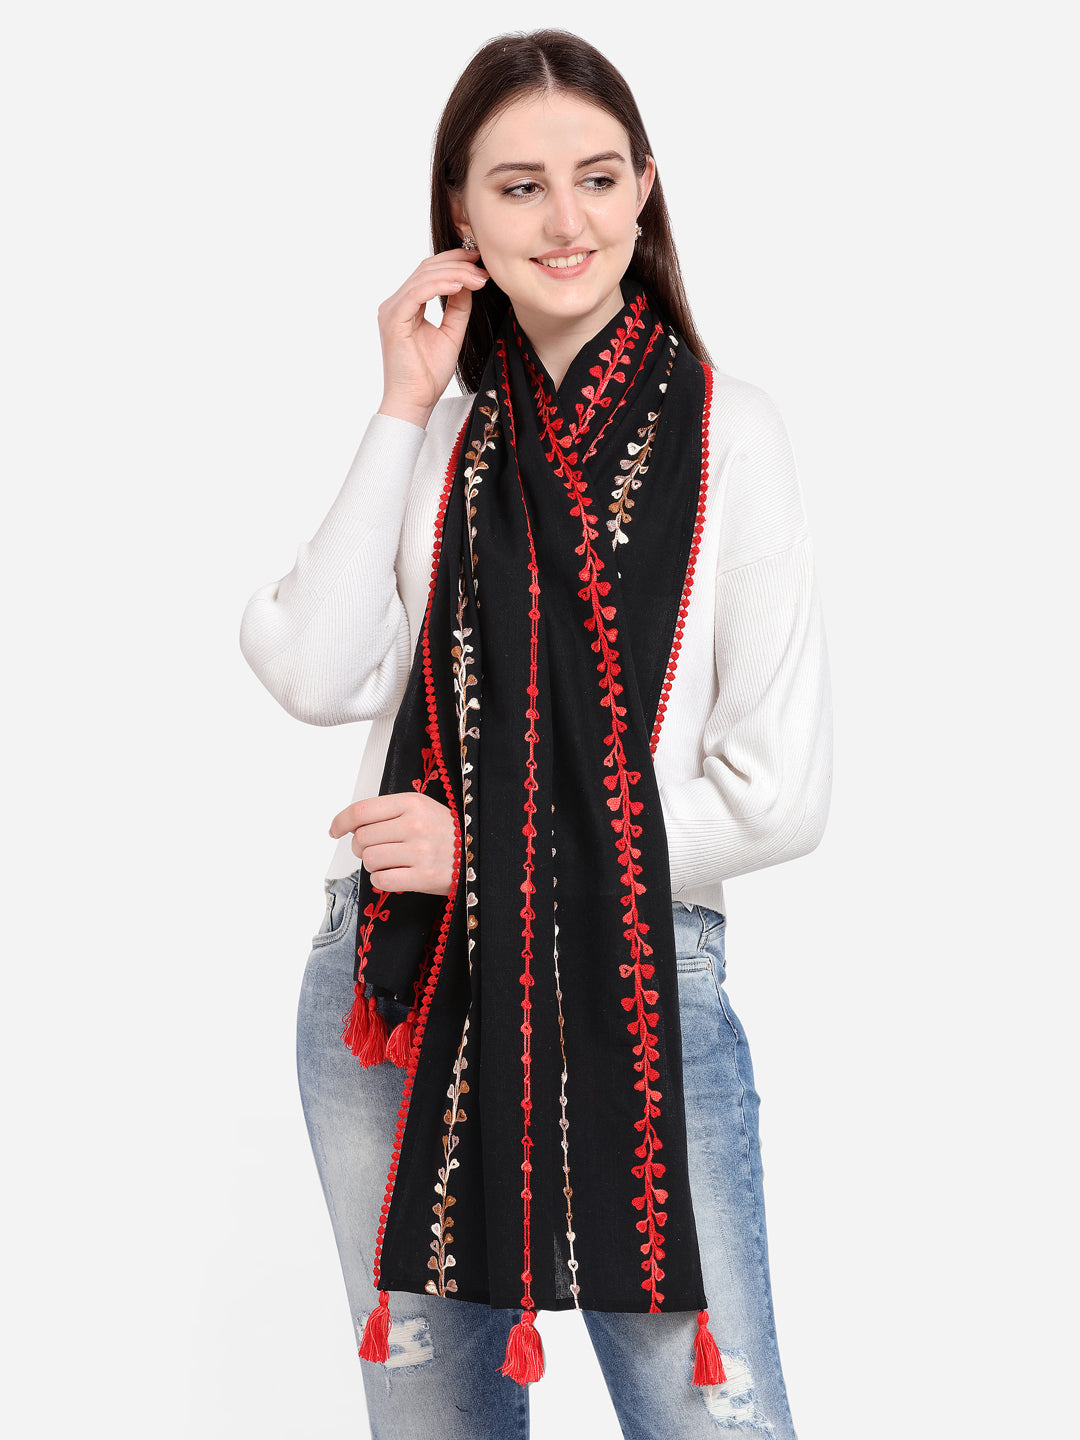 Women's   Red Little Hearts Khadi Black Embroidered Stole/Scarf  - MESMORA FASHIONS